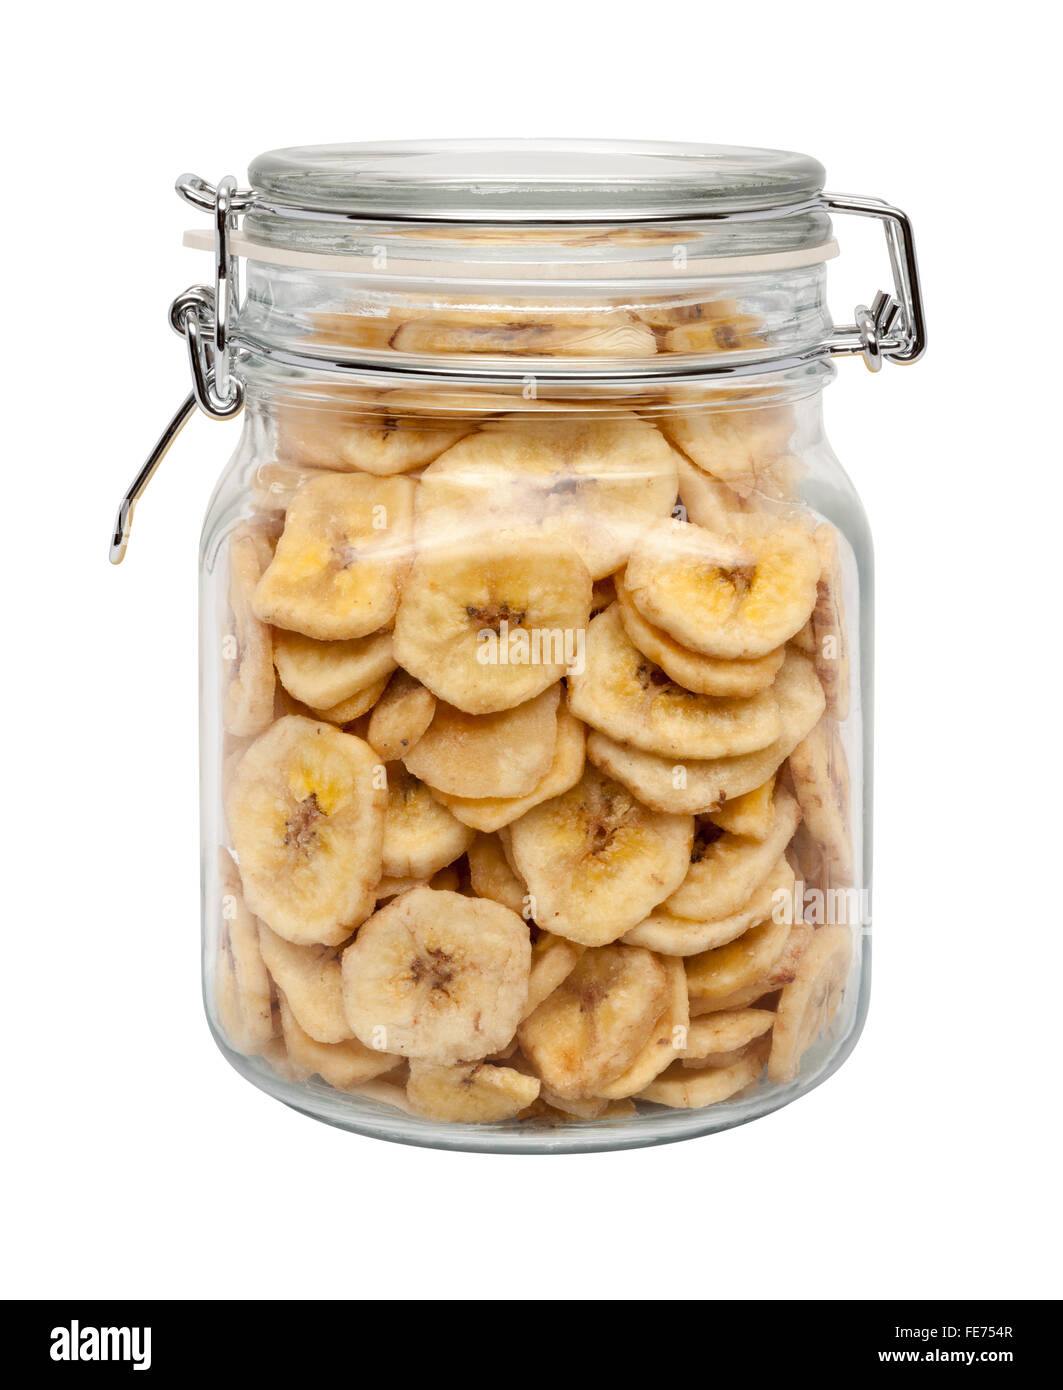 Dried Banana Chips in a Glass Canister with a Metal Clamp. The image is a cut out, isolated on a white background. Stock Photo